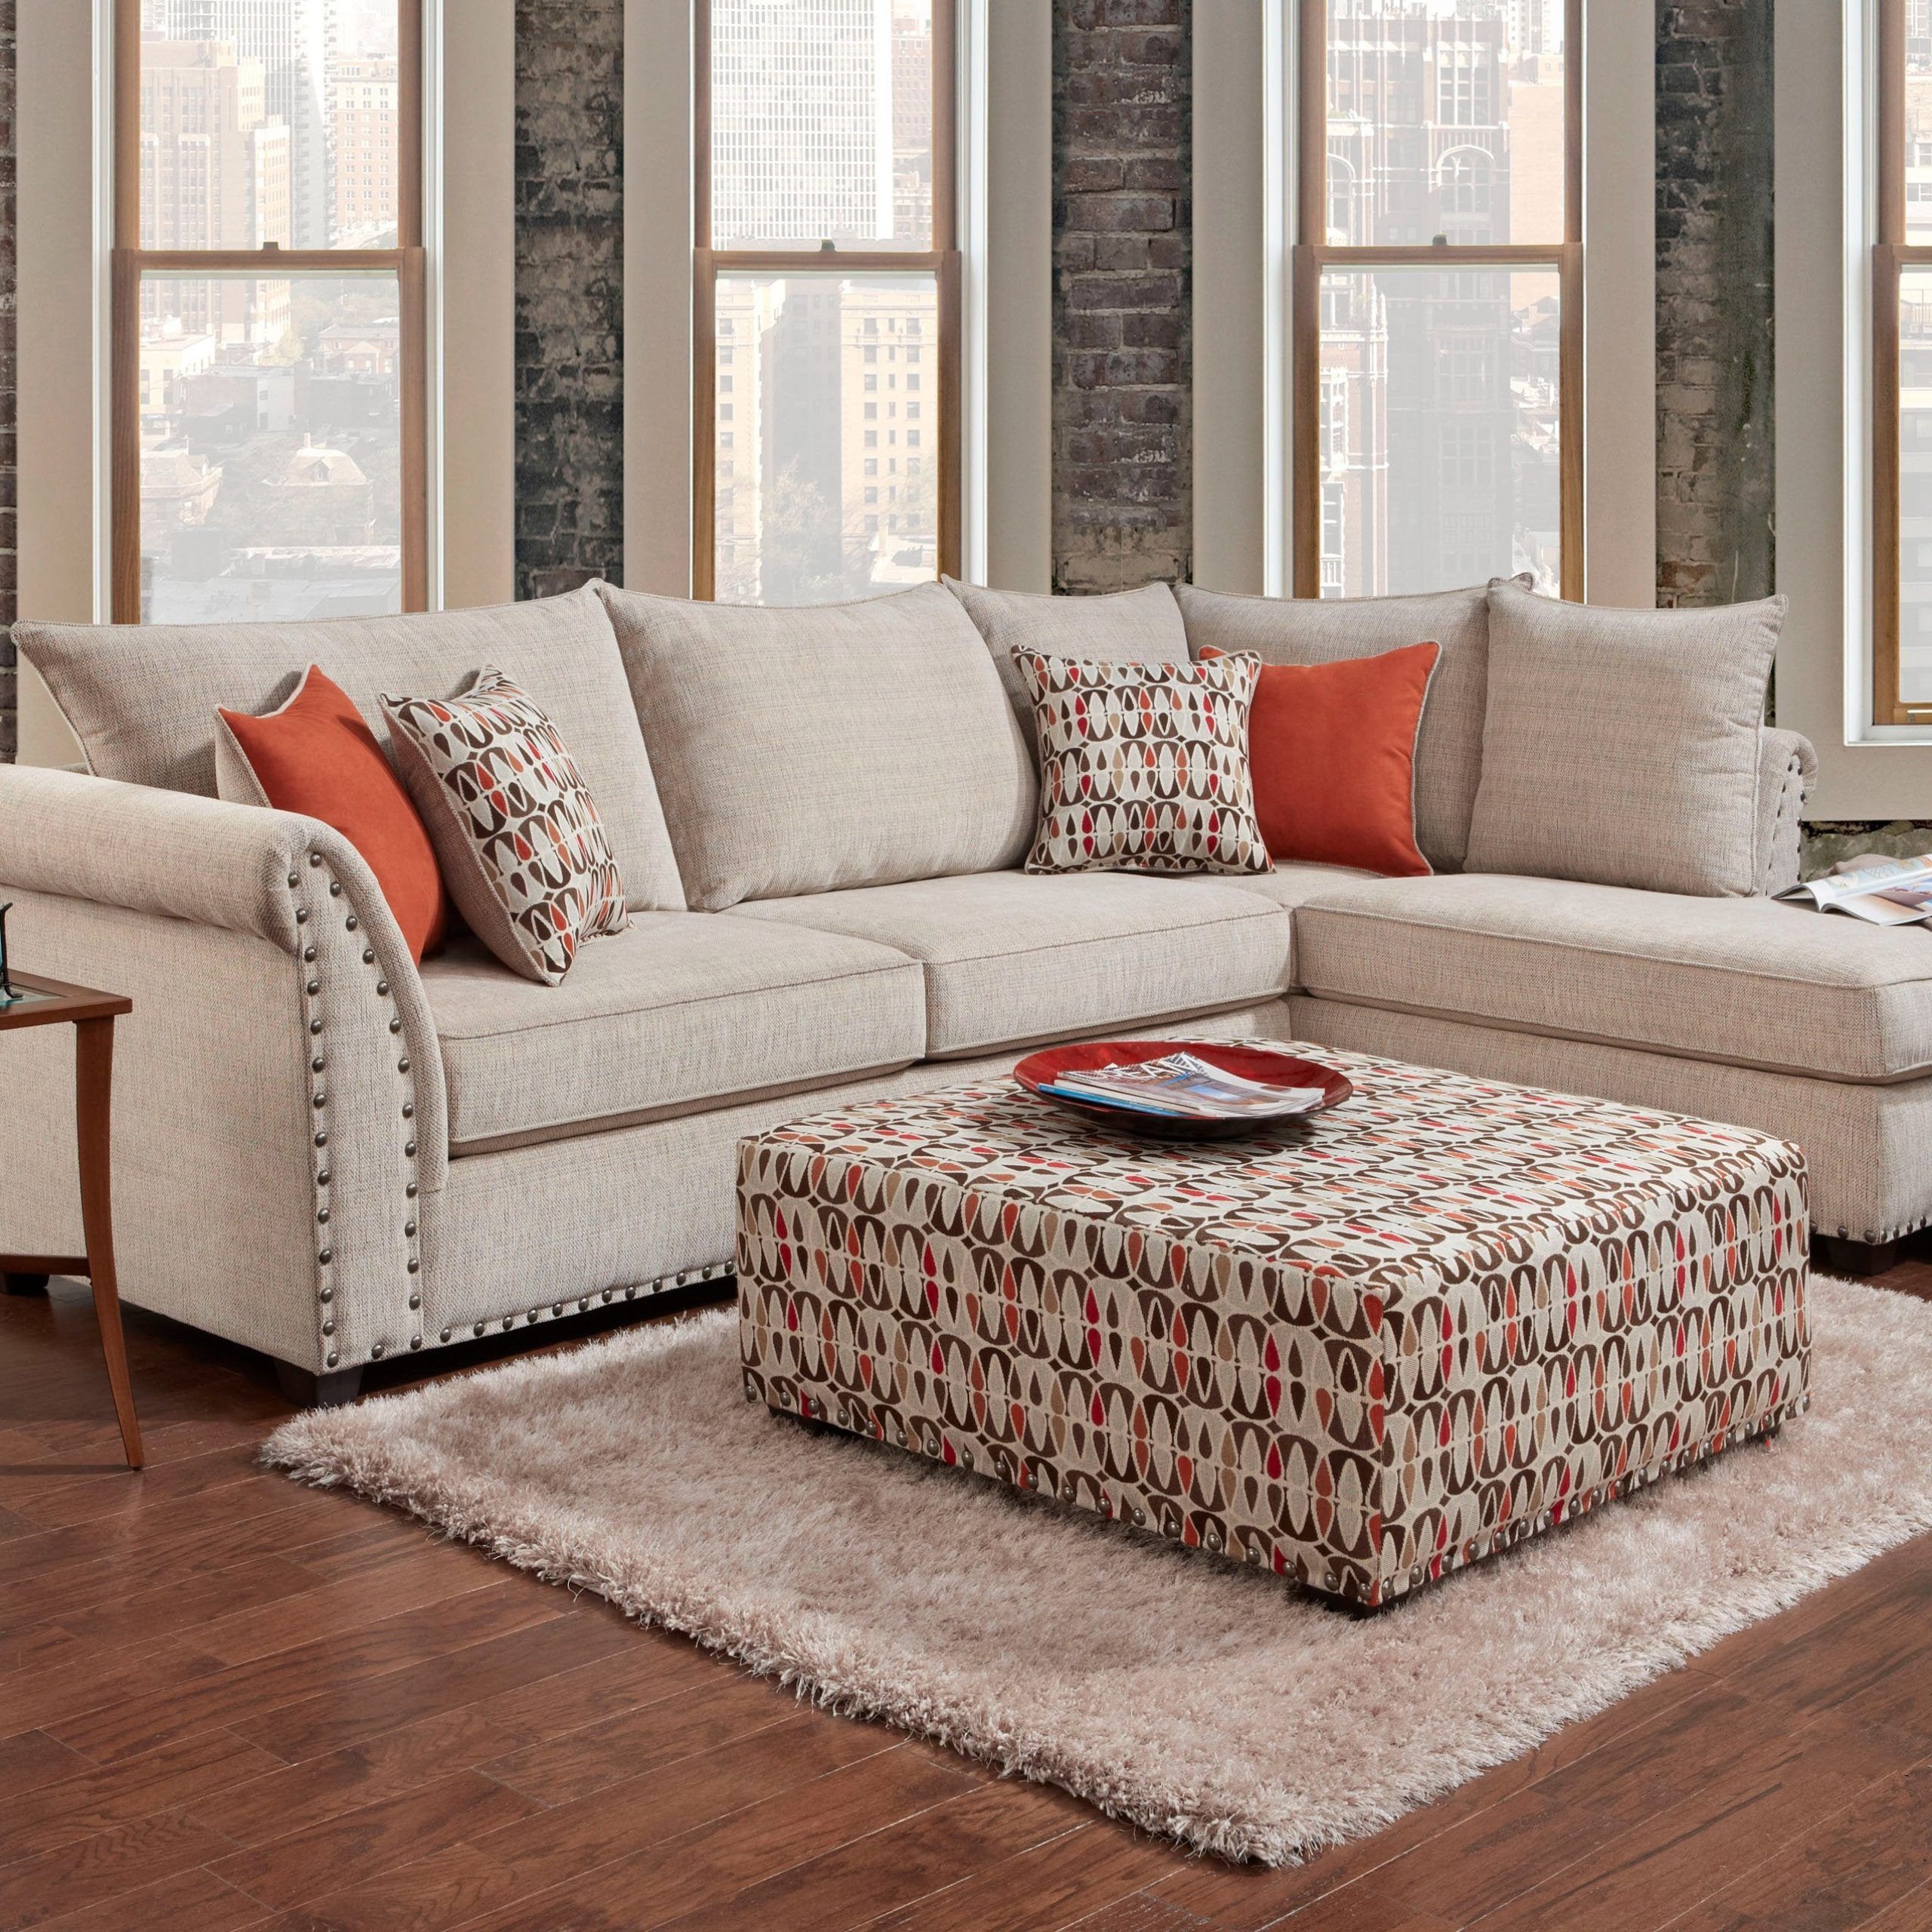 Patton Beige Sectional Sofa Set – Afurniturecompany Pertaining To Small L Shaped Sectional Sofas In Beige (Gallery 5 of 21)